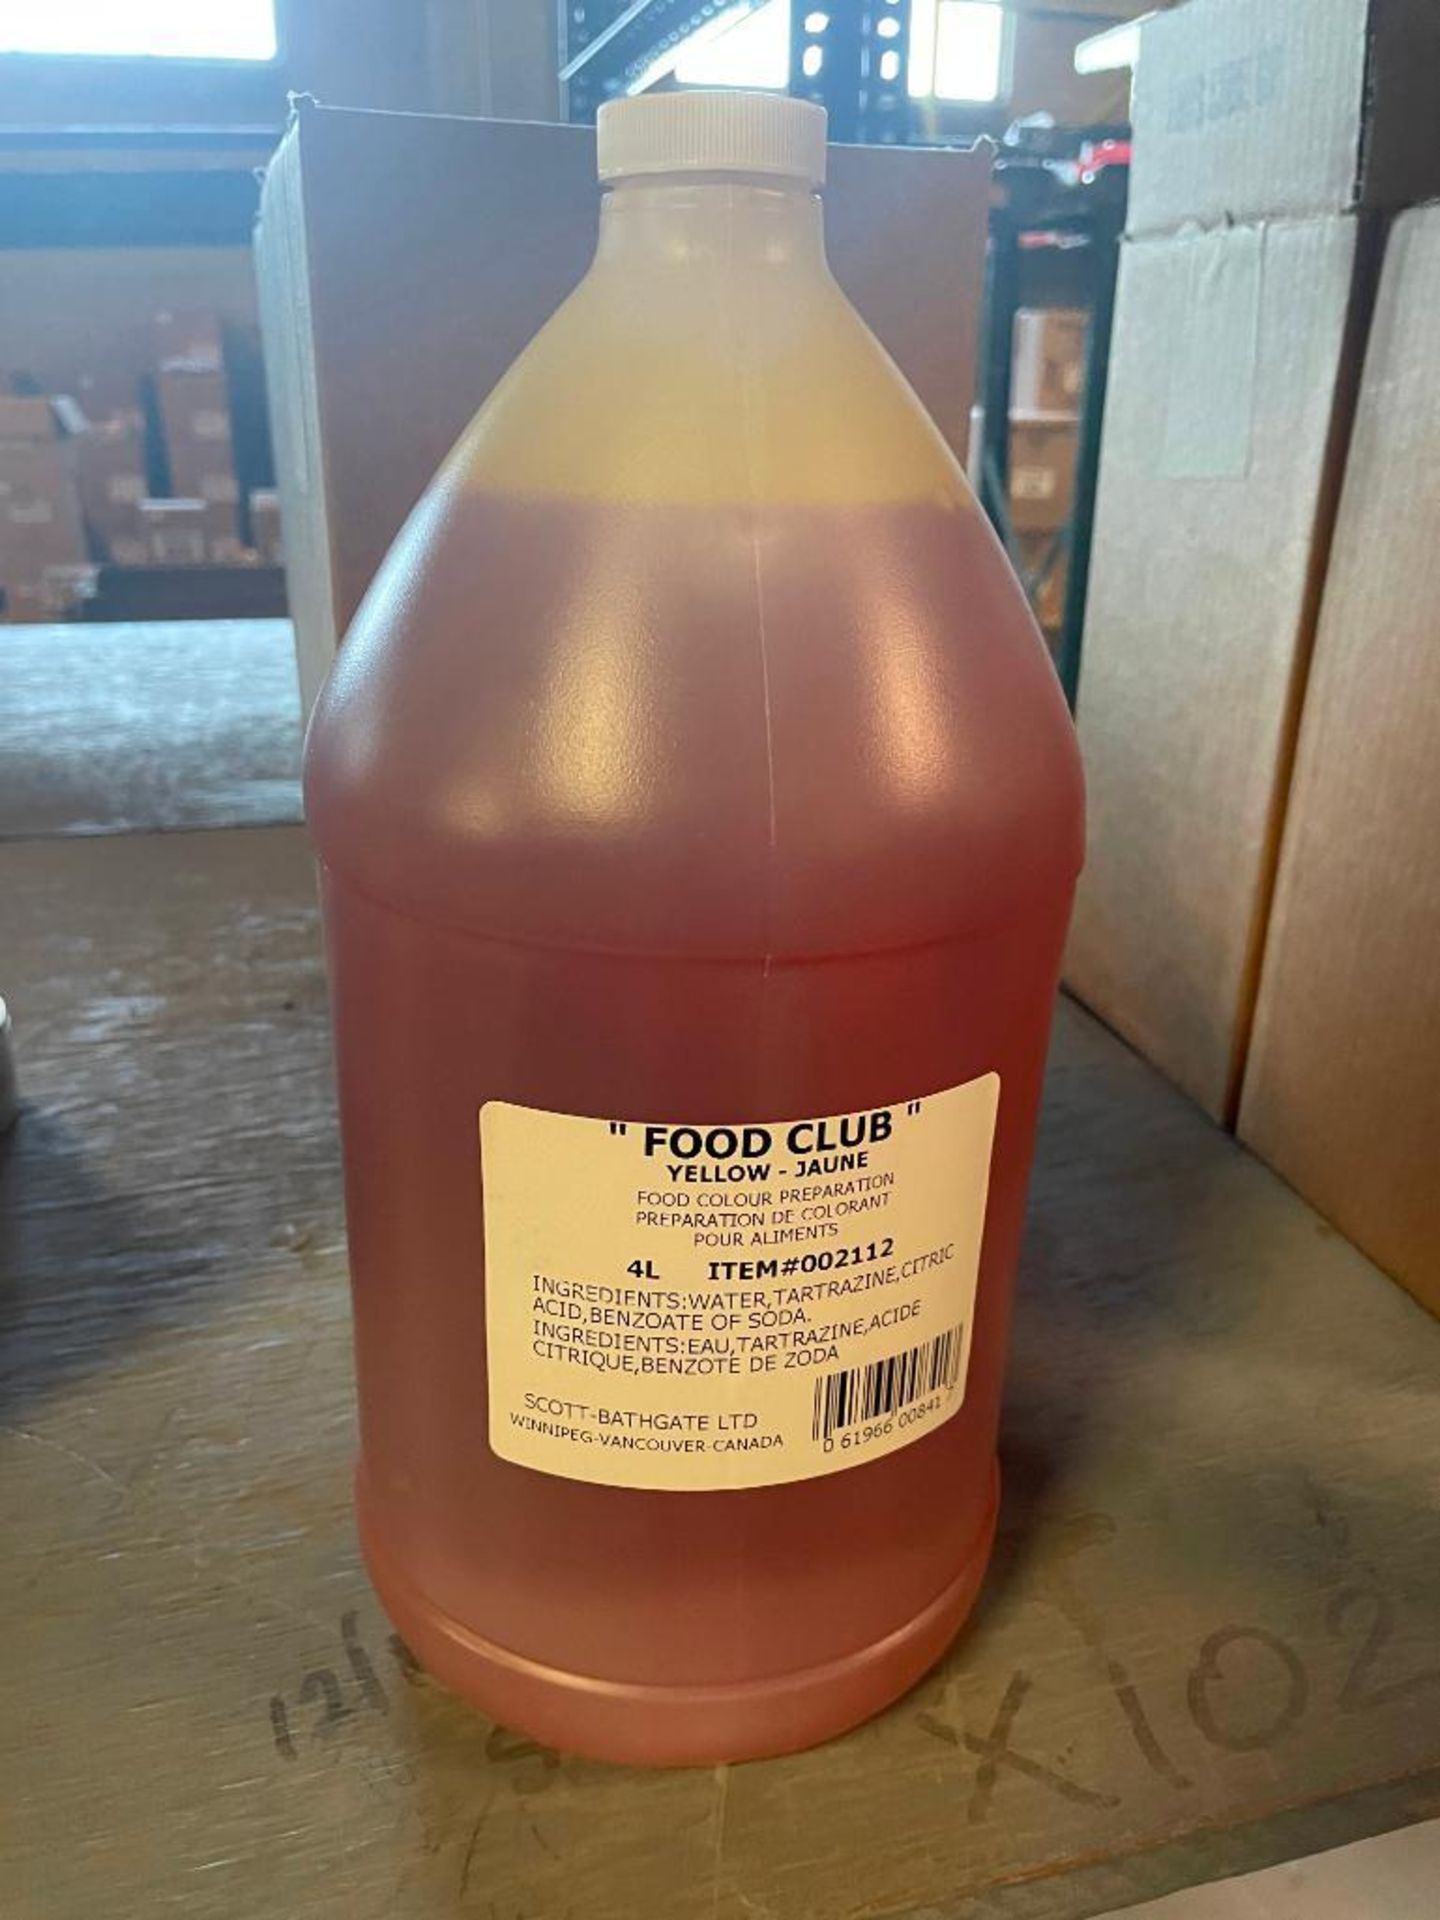 (3) BOXES OF FOOD CLUB YELLOW FOOD COLOR PREPARATION, 4L BOTTLE PER BOX - Image 3 of 3